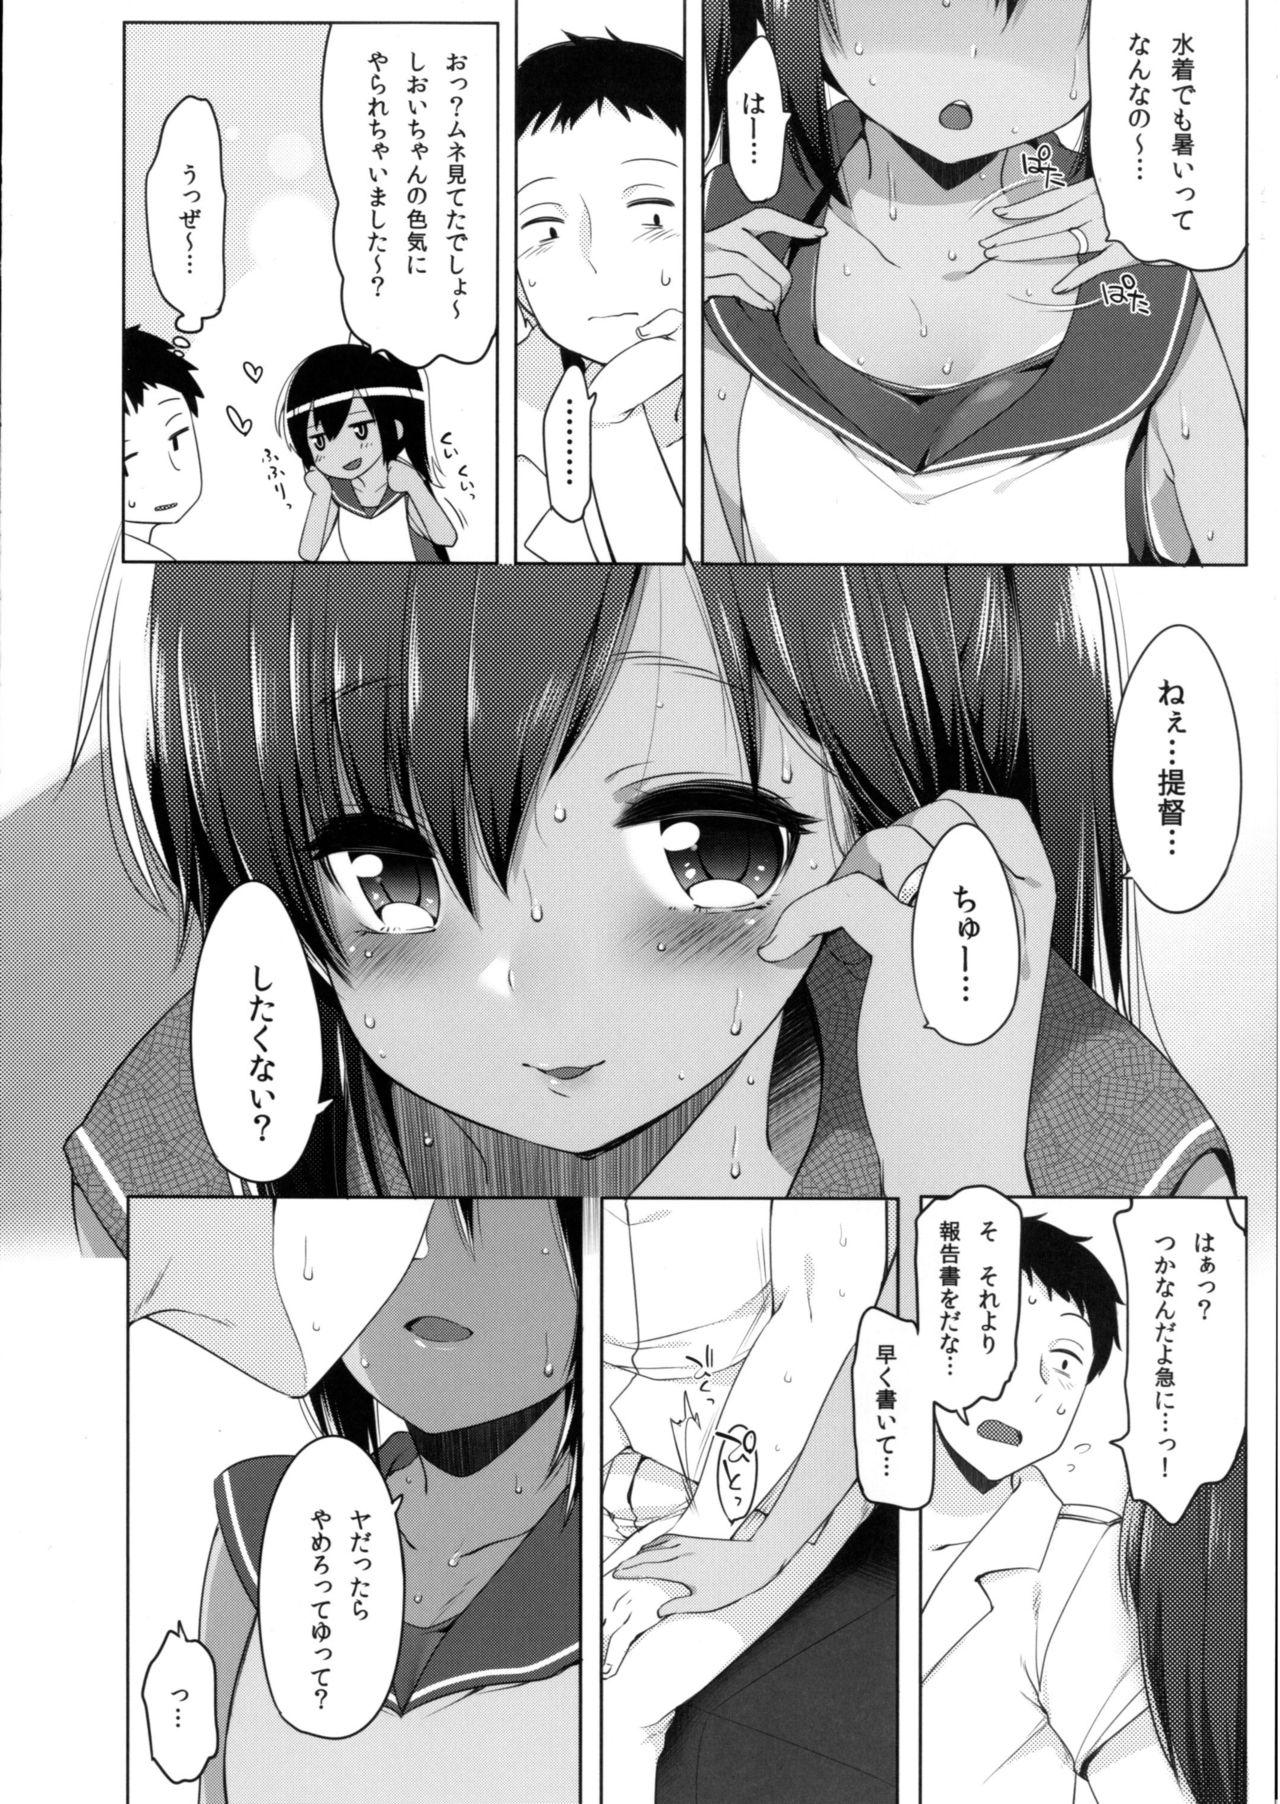 Periscope 401 - Kantai collection Big - Page 5